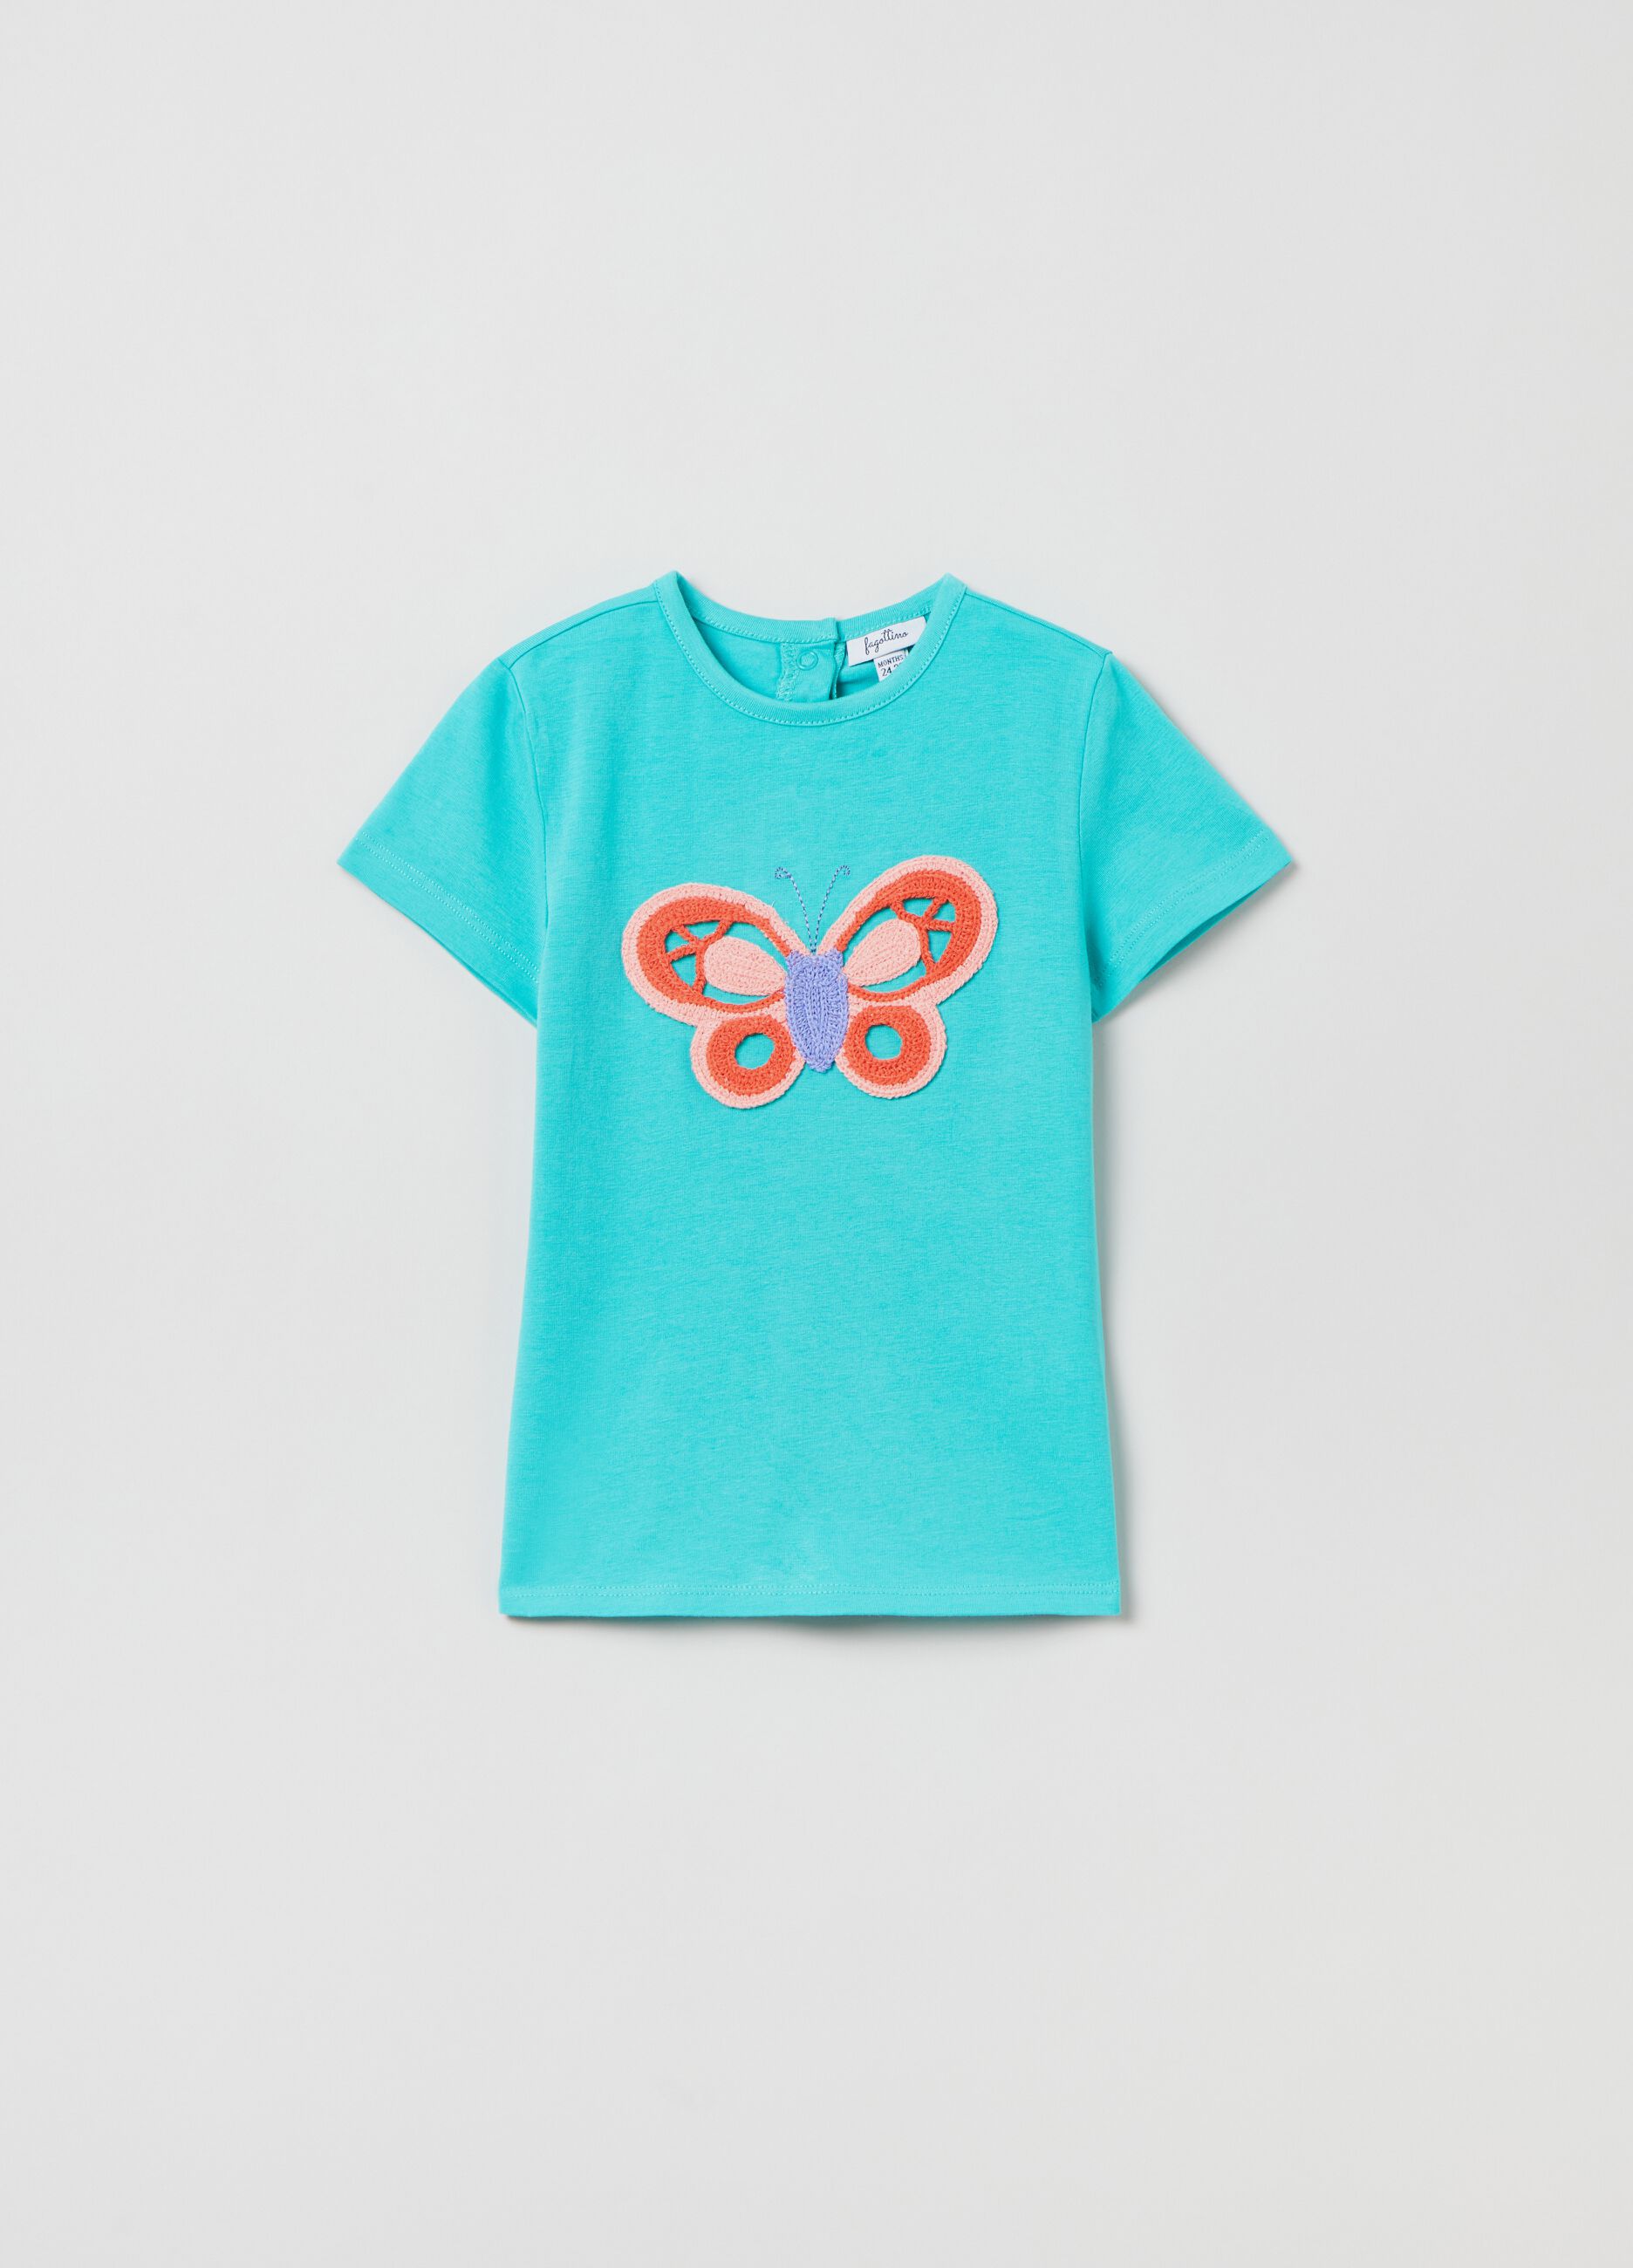 T-shirt with crochet butterfly